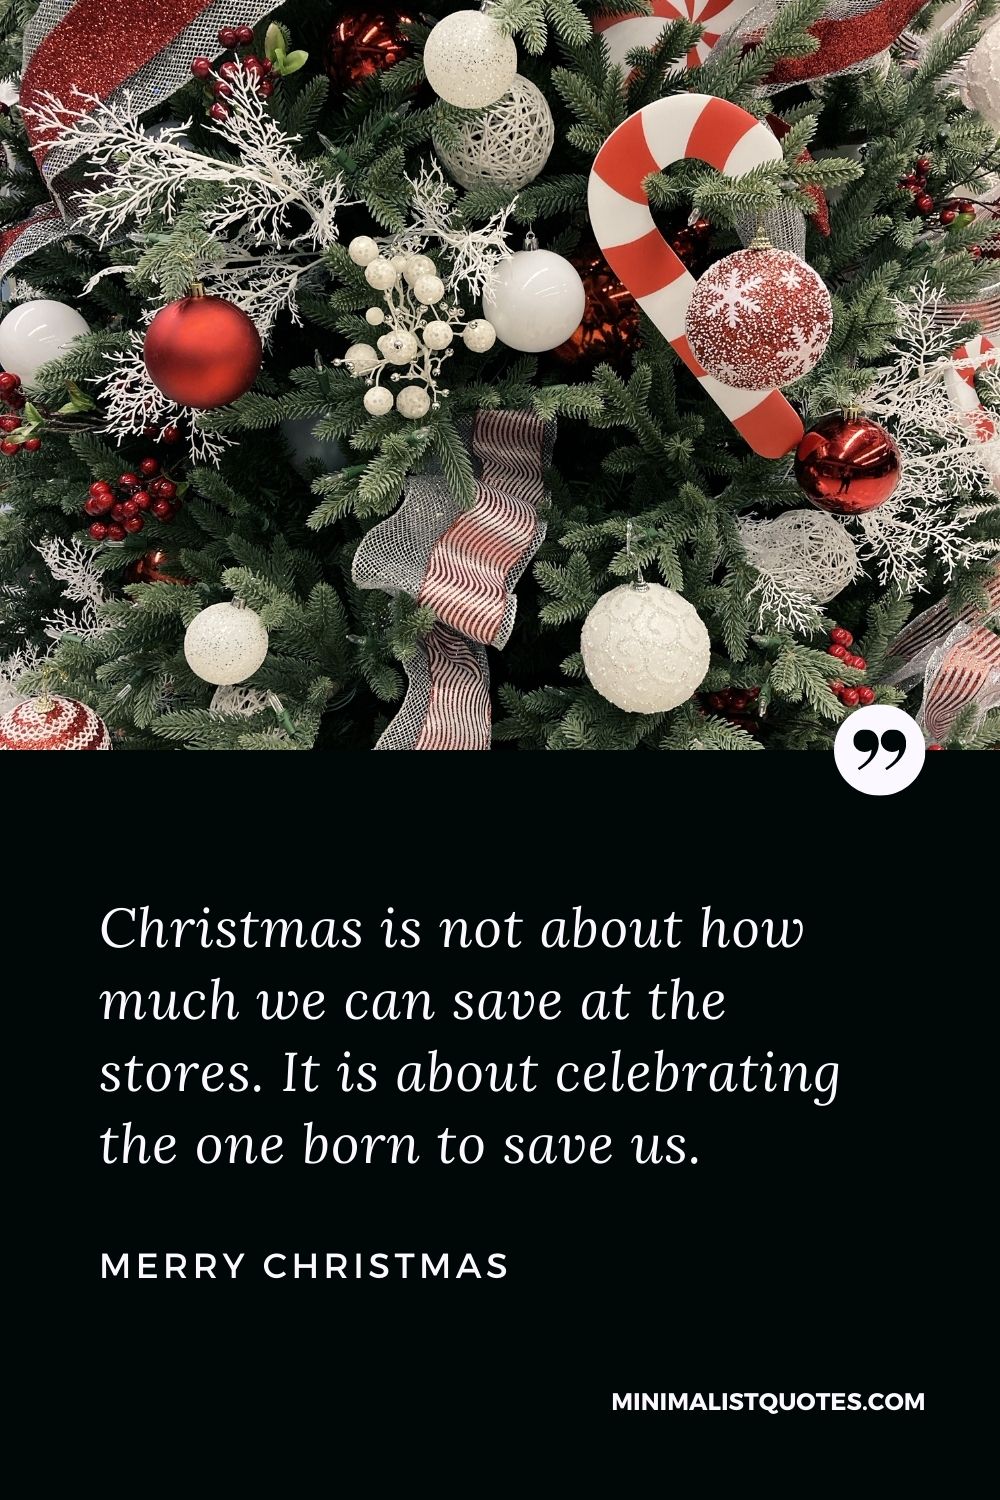 Merry Christmas Wish - Christmas is not about how much we can save at the stores. It is about celebrating the one born to save us.